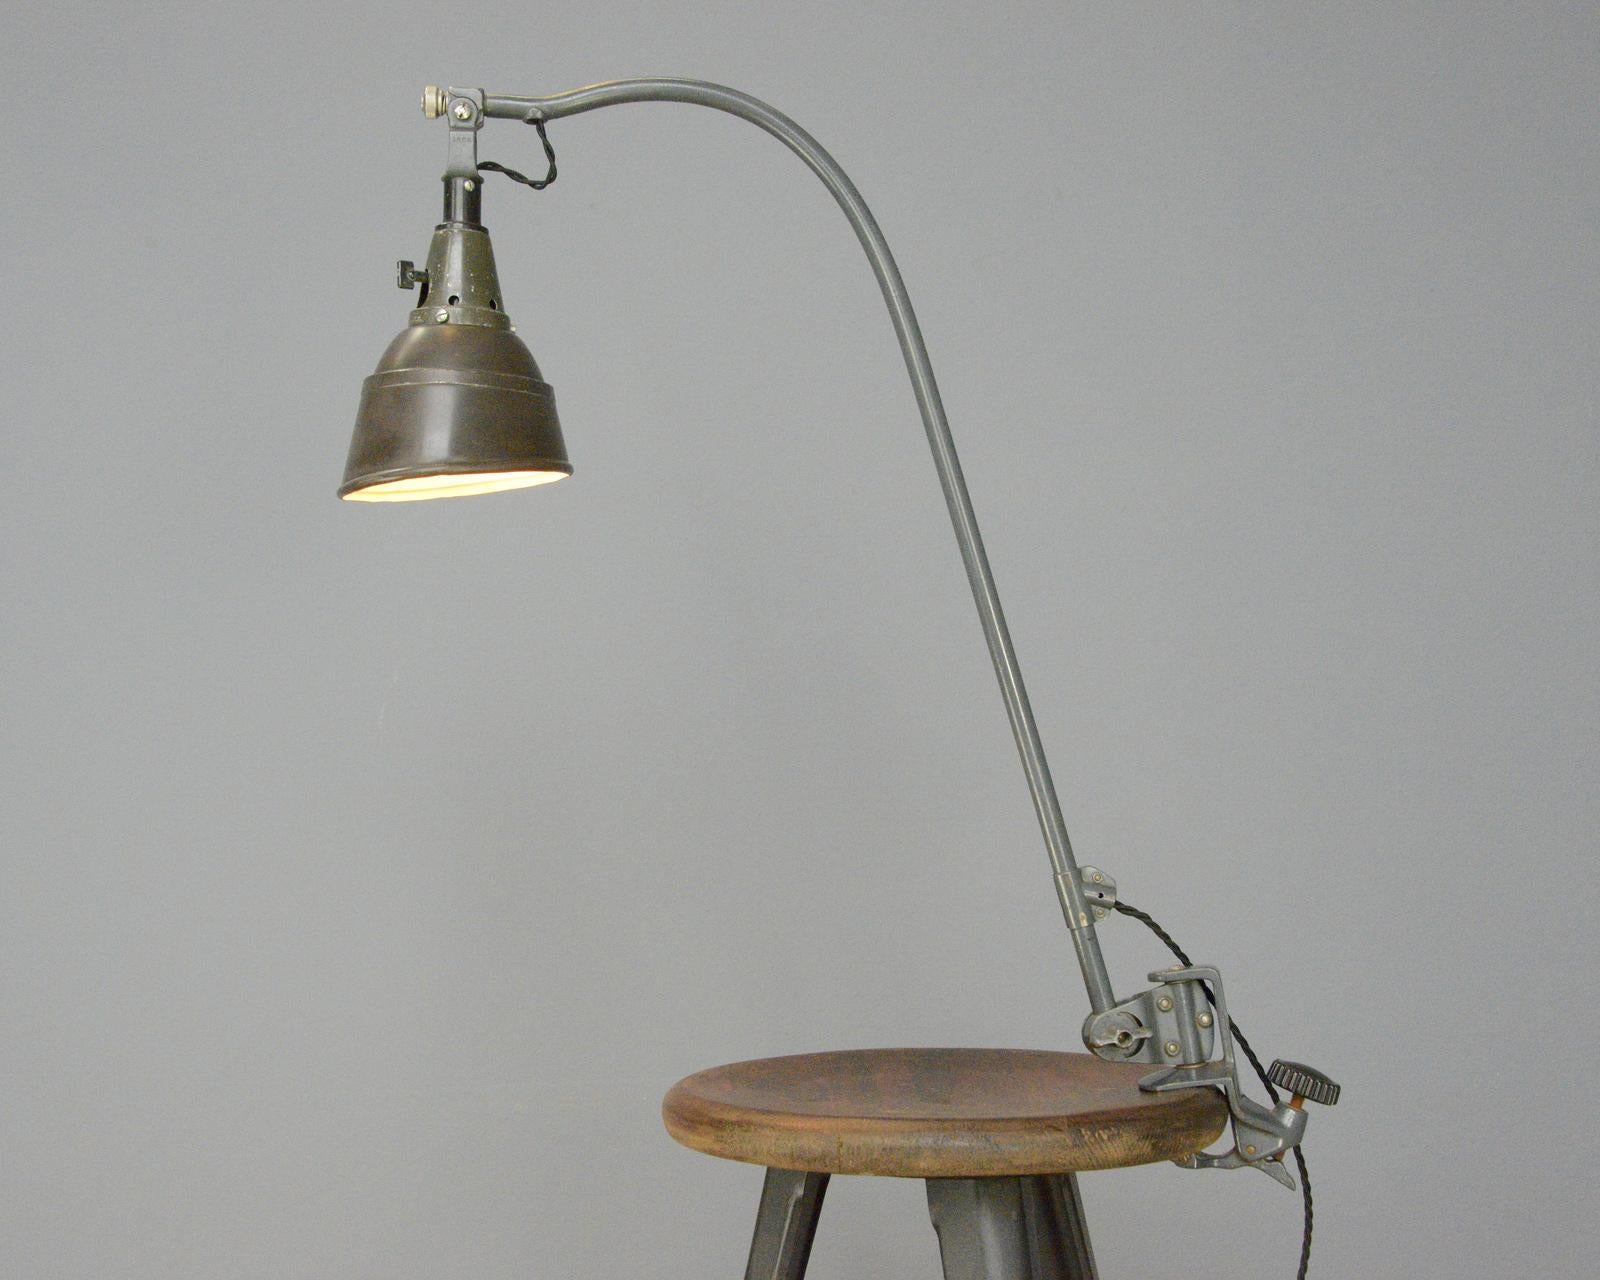 Mid-20th Century Typ 113 Peitsche Table Lamp by Curt Fischer for Midgard circa 1940s For Sale